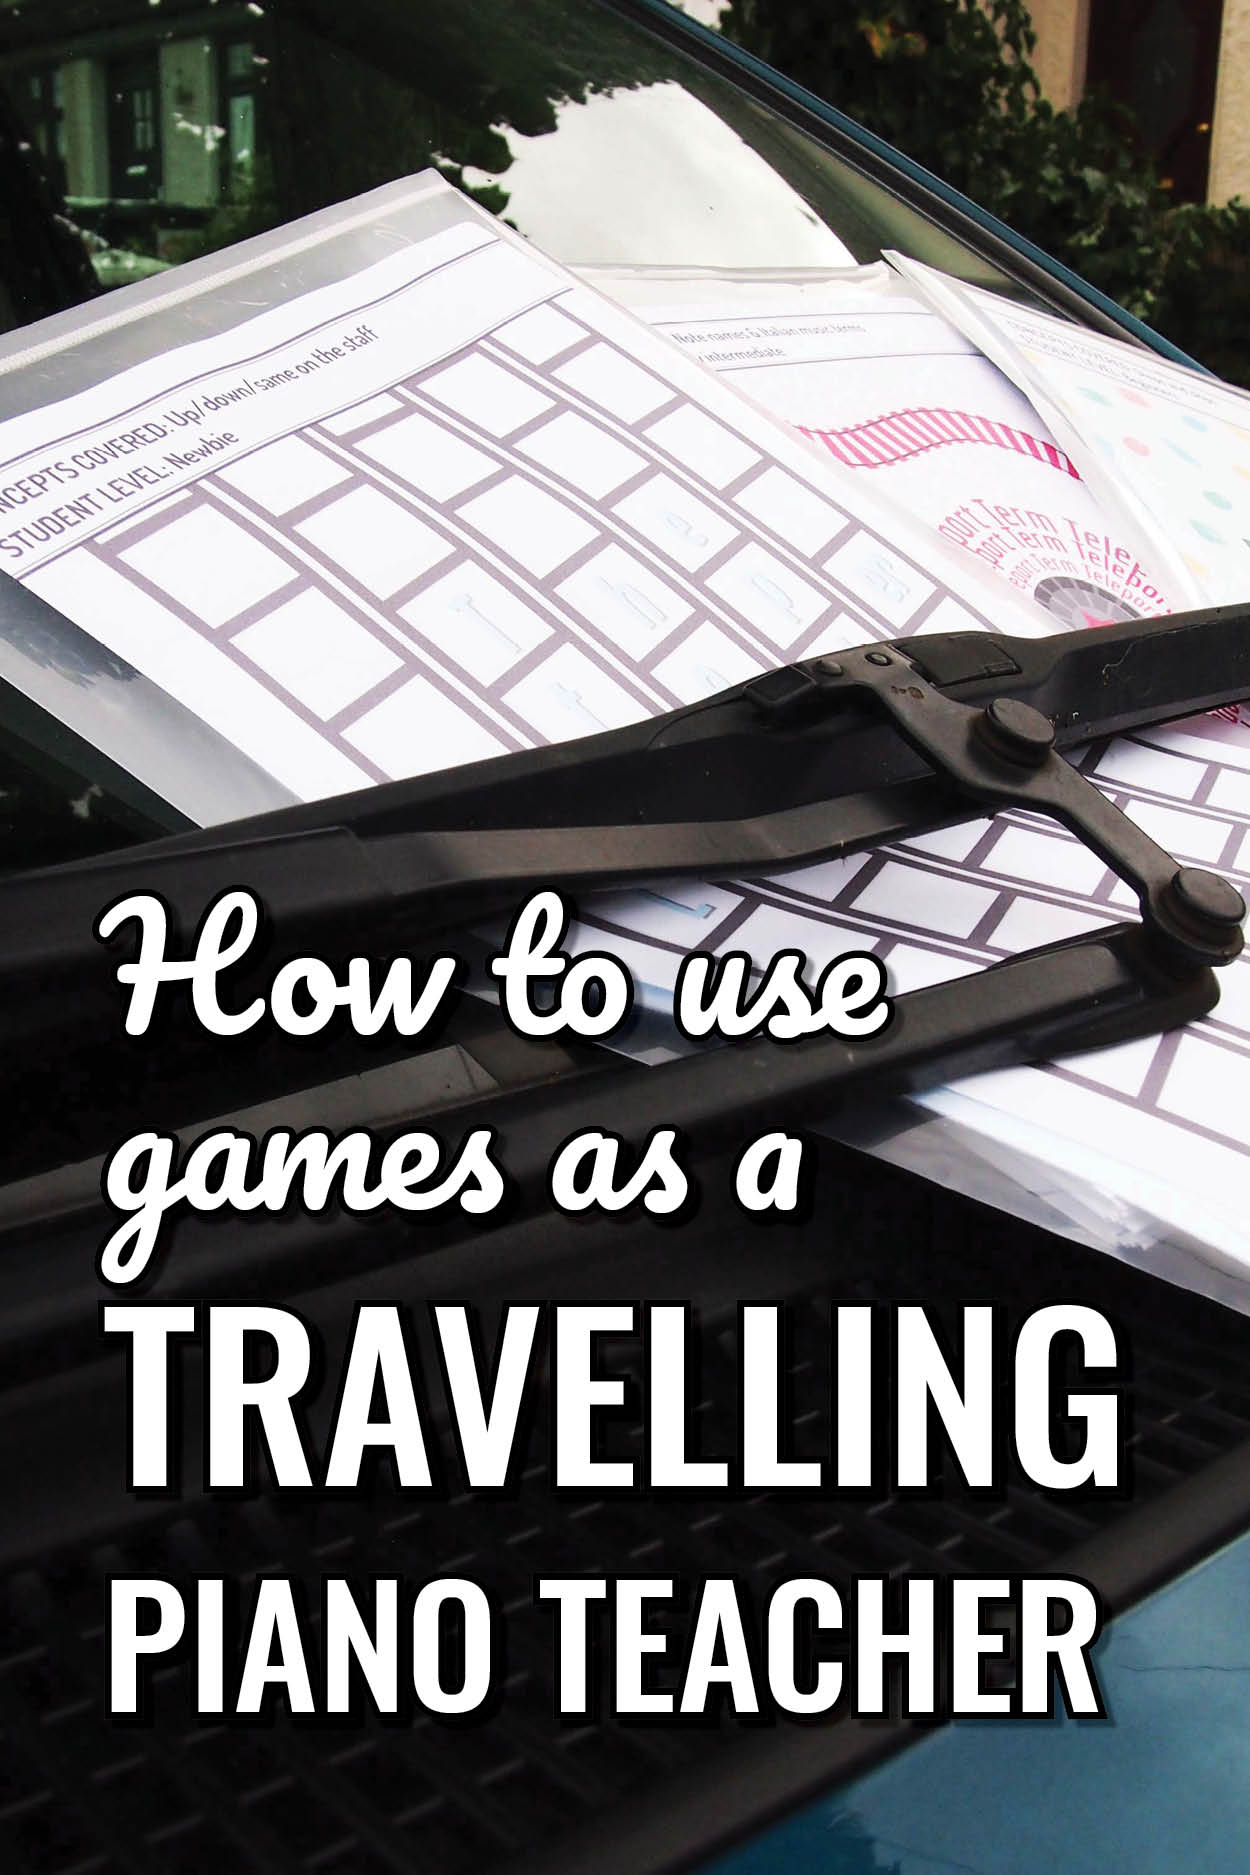 How to plan games for piano lessons – for travelling piano teachers